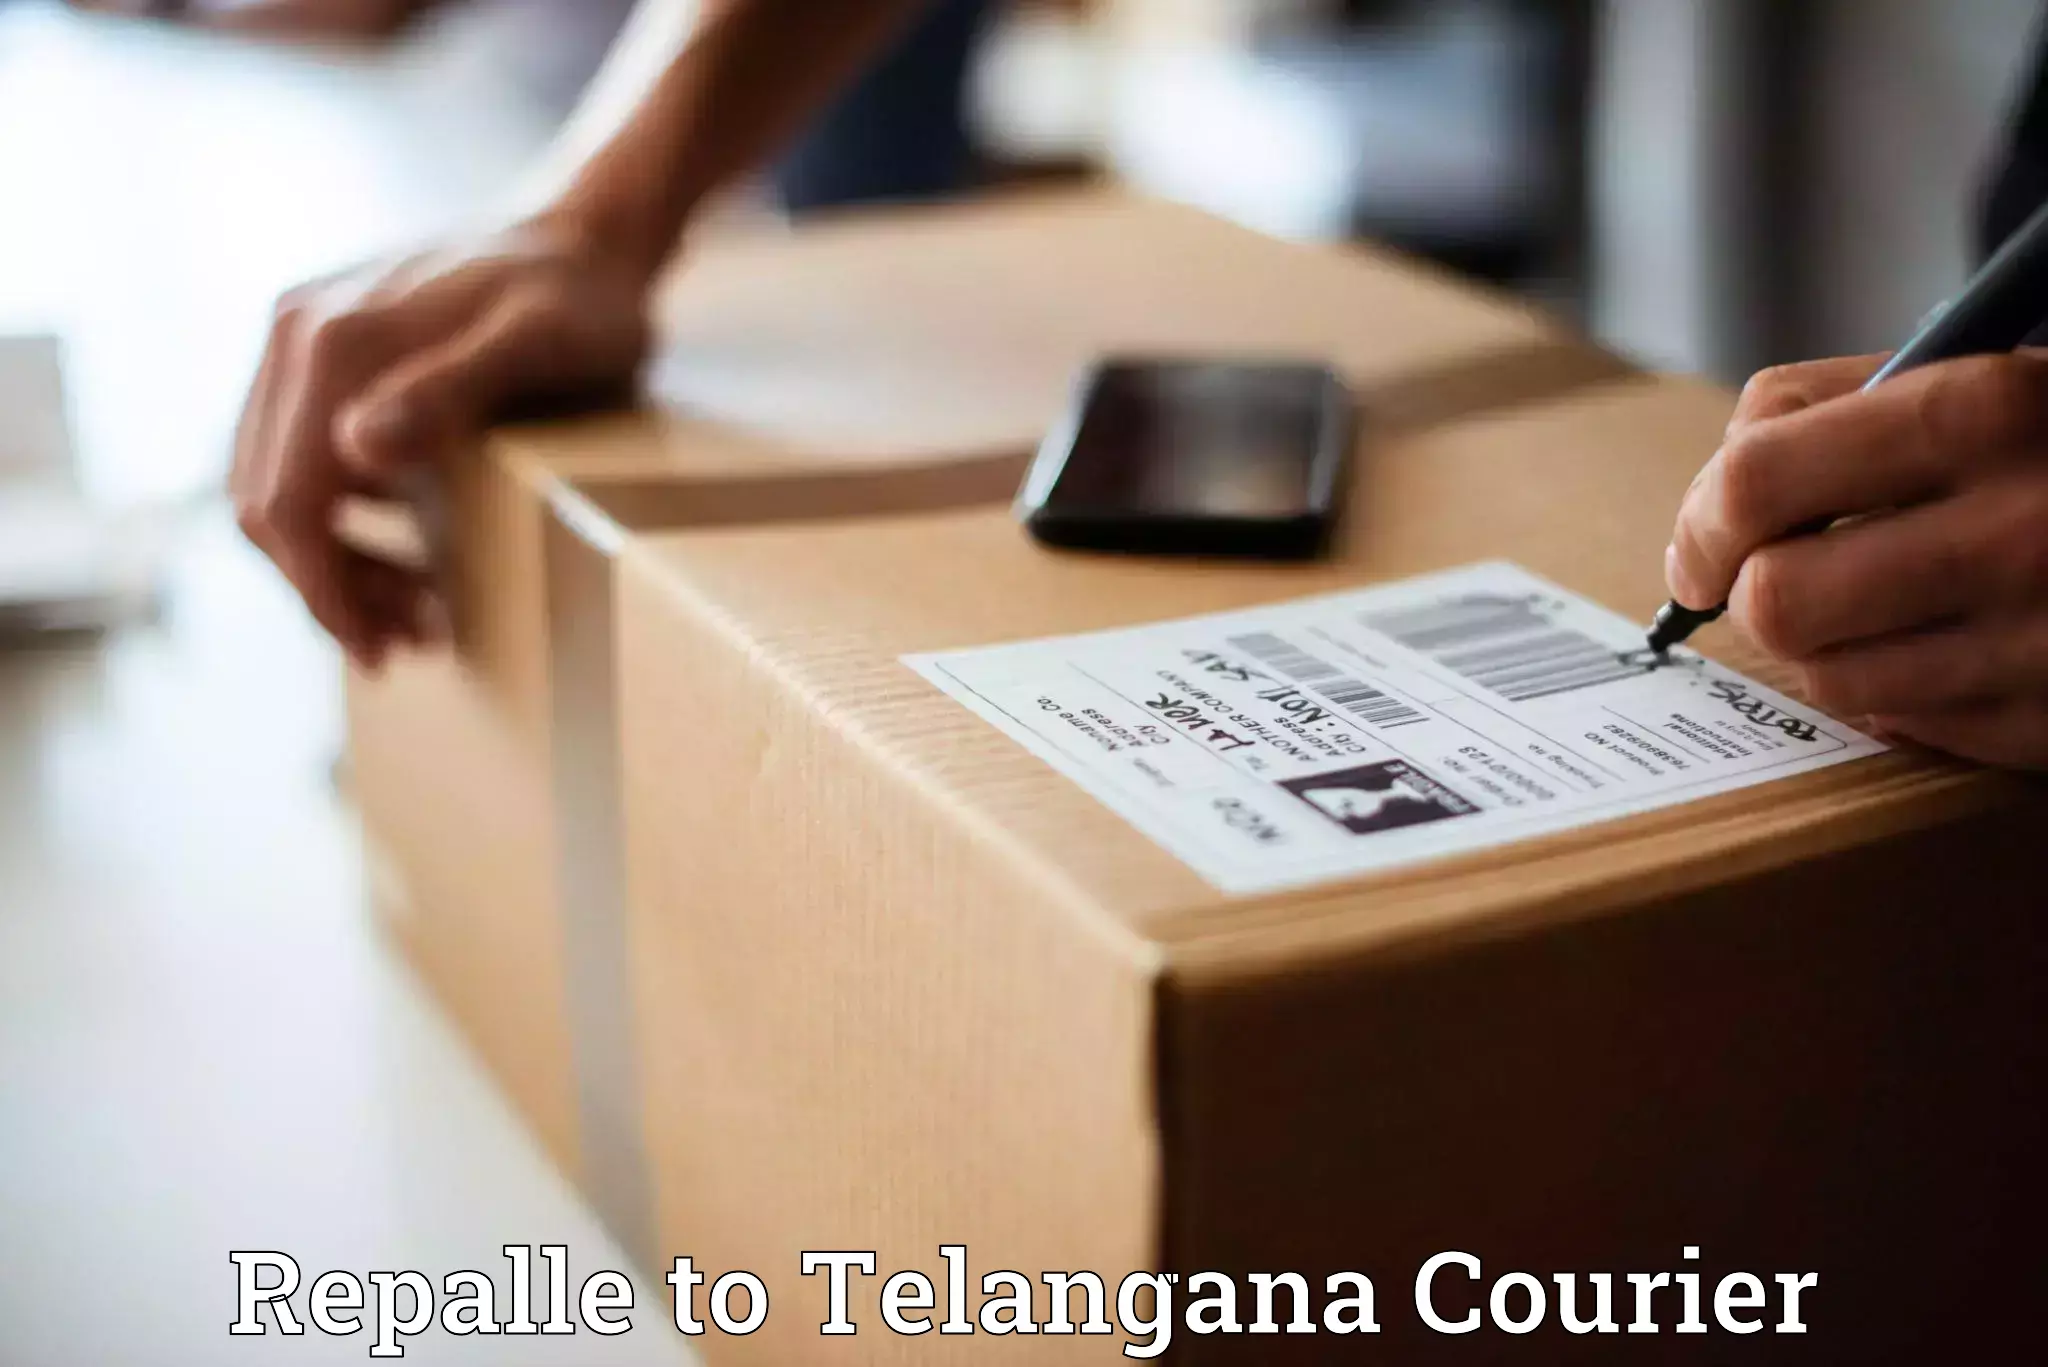 On-call courier service Repalle to Alair